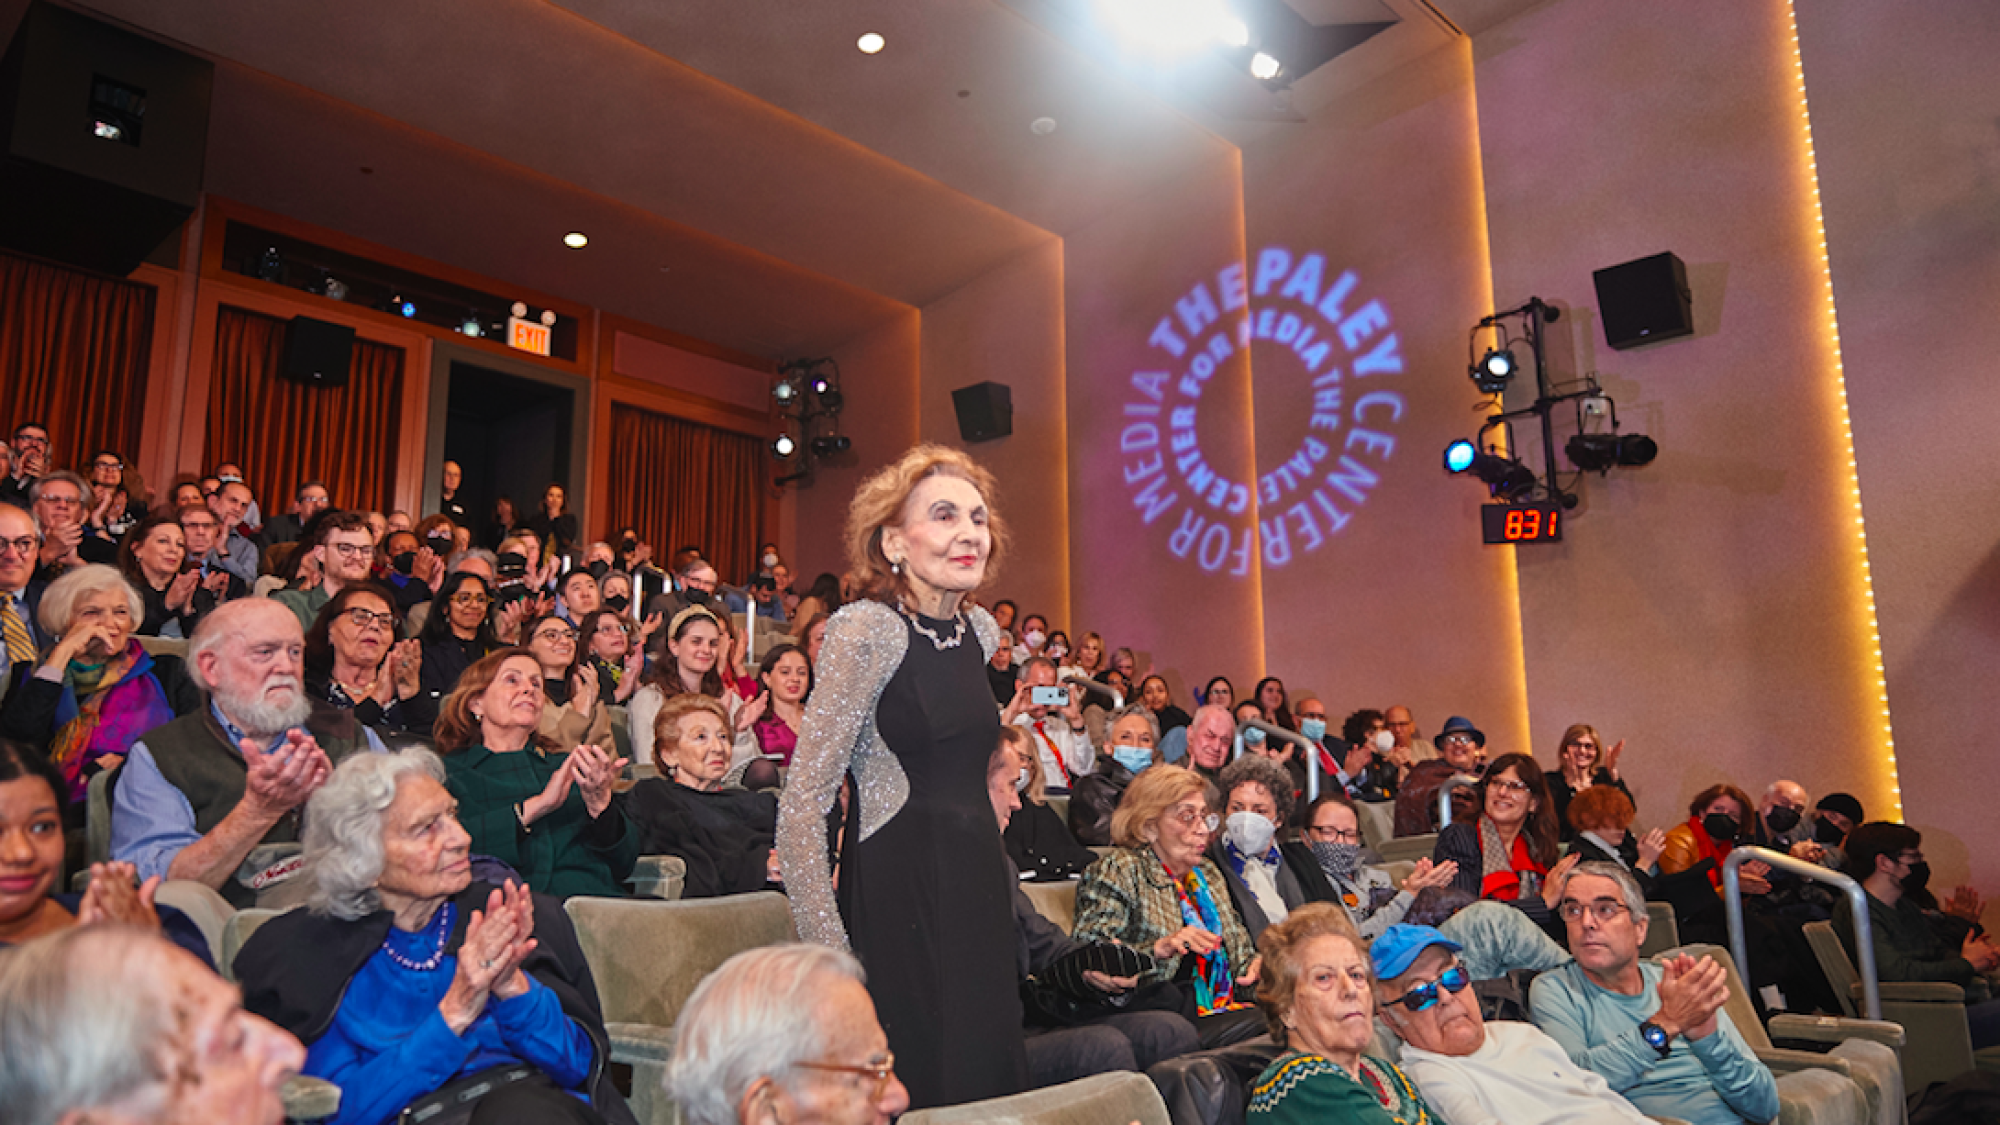 Holocaust survivor Helena Weinrauch, who appears in “Reckonings,” stands and receives a round of applause at The Paley Center for Media in Manhattan. Credit: Perry Bindelglass.